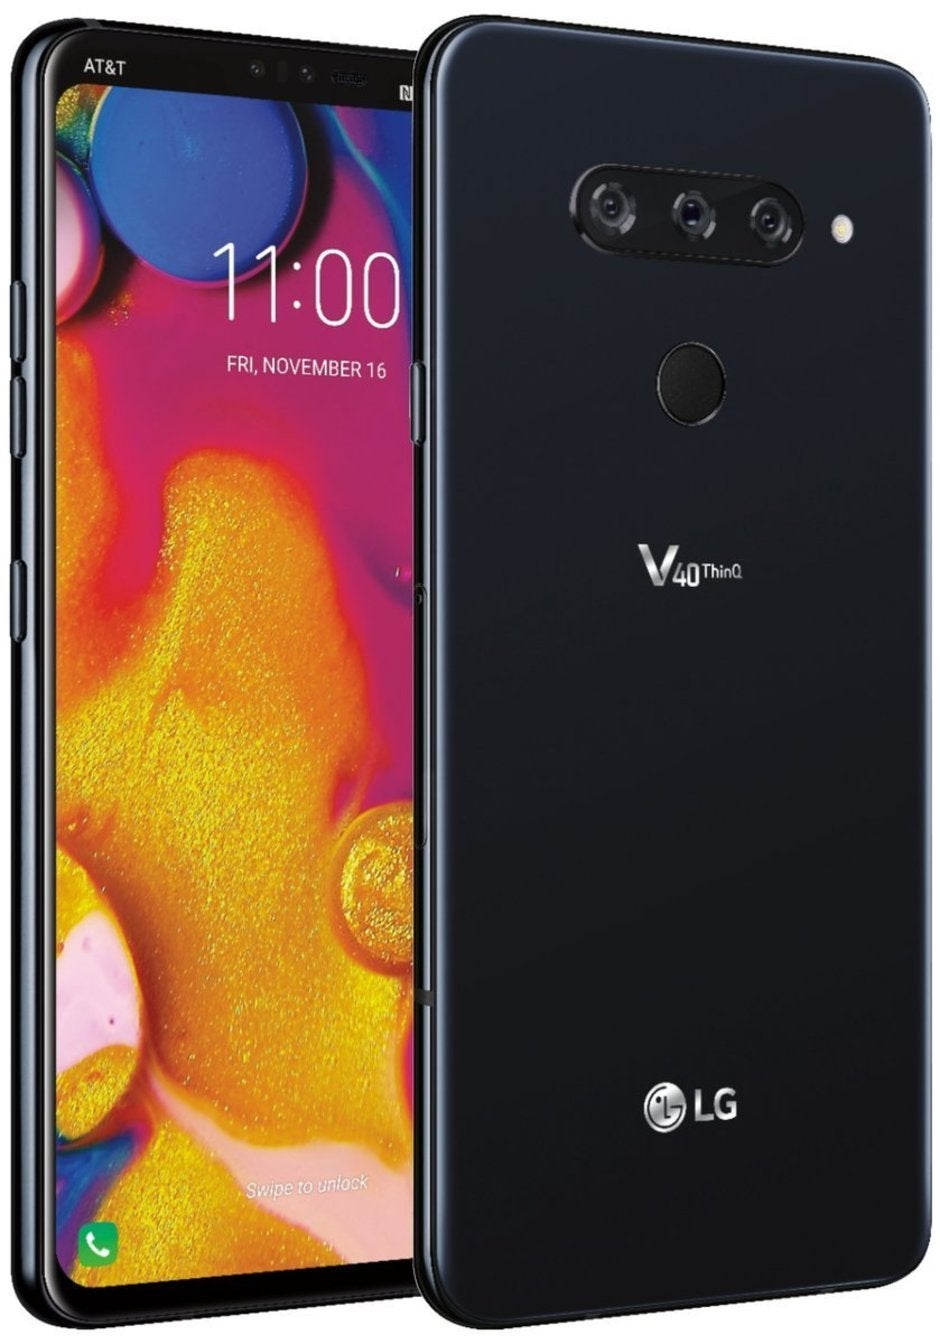 The LG V40 for AT&amp;amp;T - LG V40 ThinQ rumor review: specs and release of LG's 4th flagship for the year